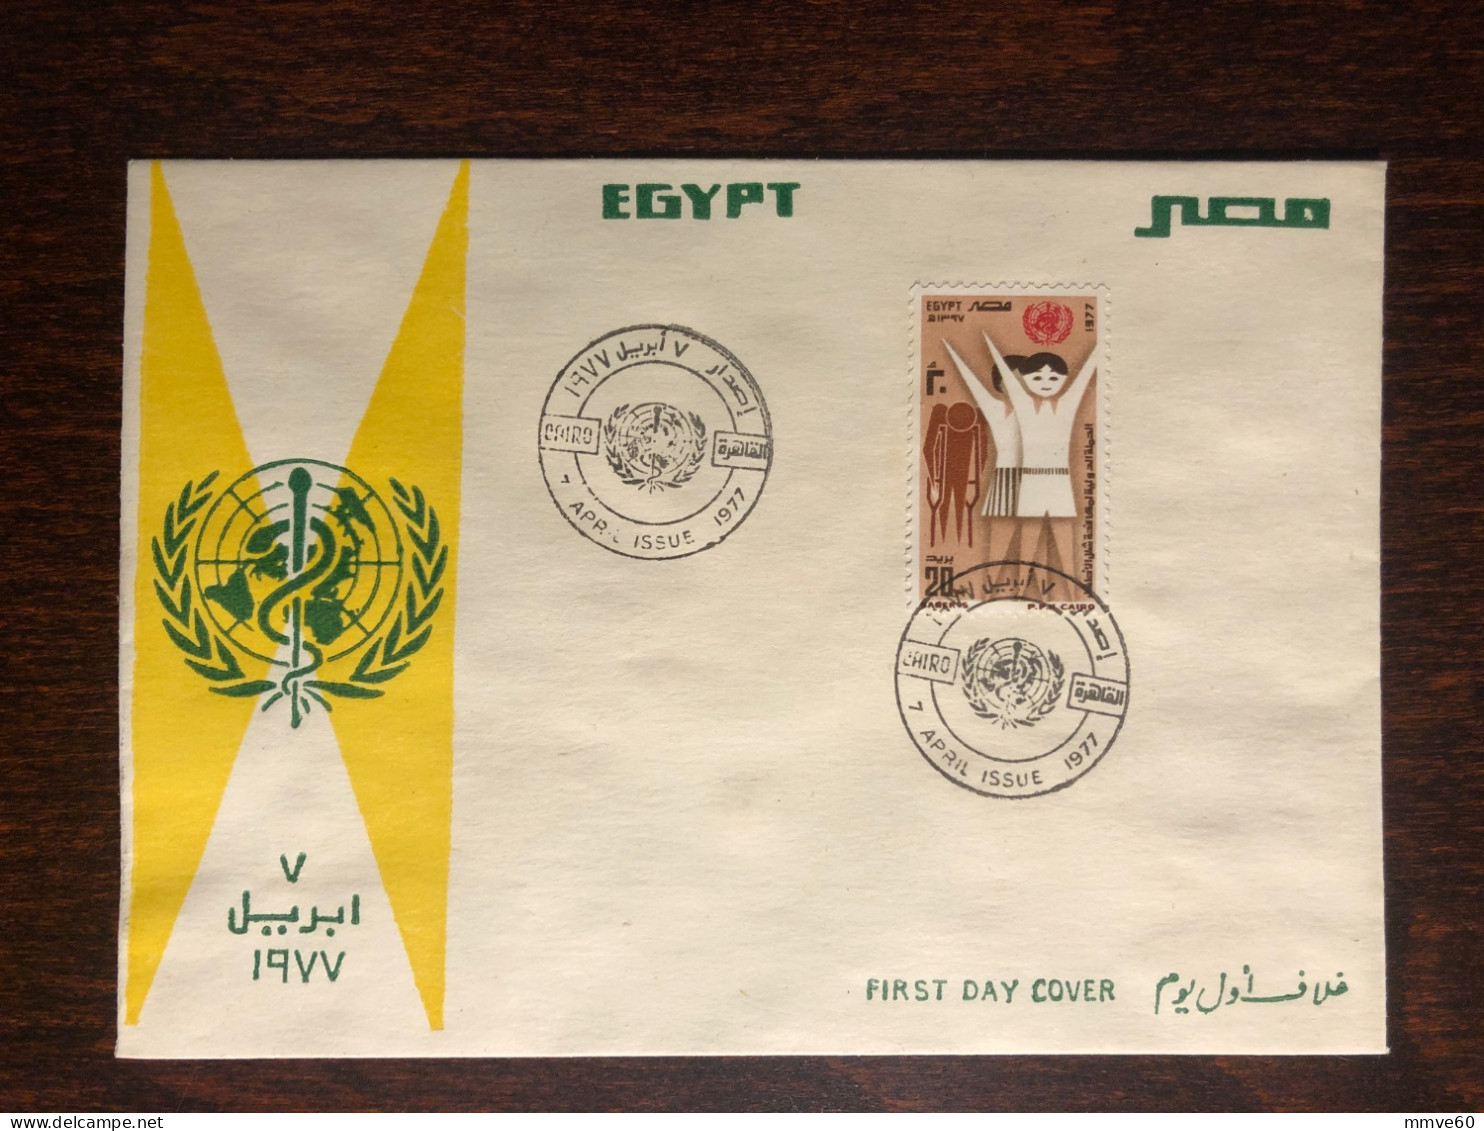 EGYPT FDC COVER 1977 YEAR DISABLED WHO HEALTH MEDICINE - Briefe U. Dokumente